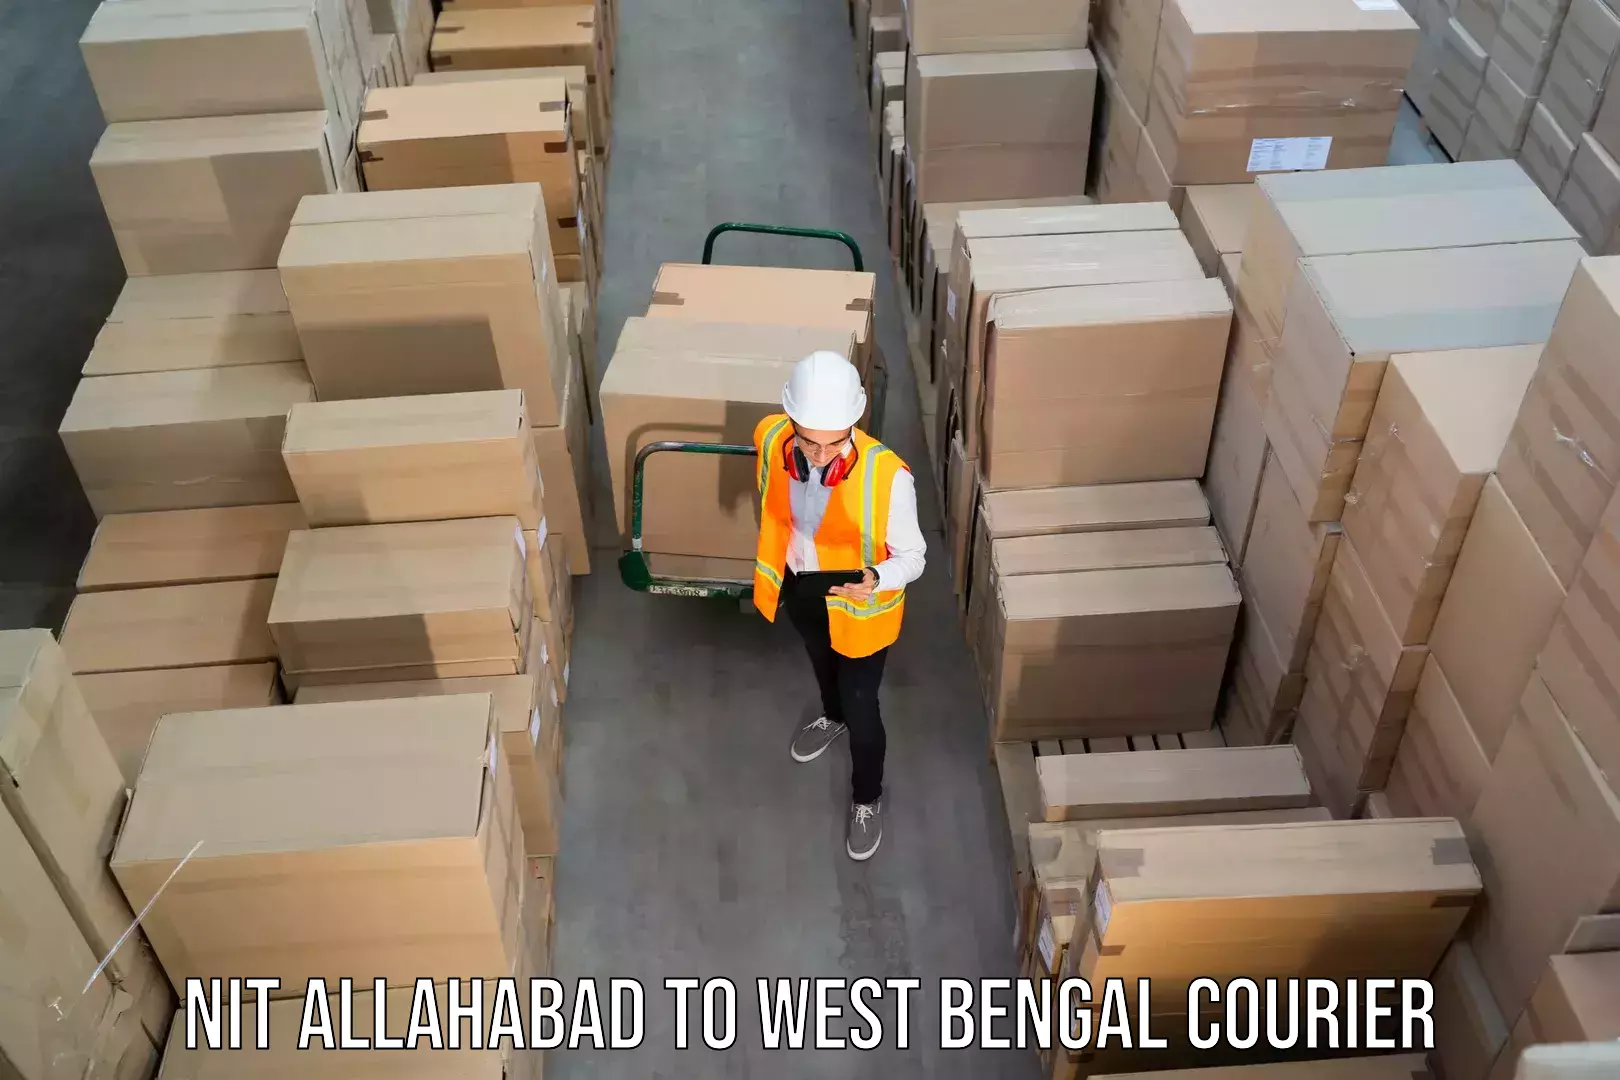 International courier networks NIT Allahabad to West Bengal